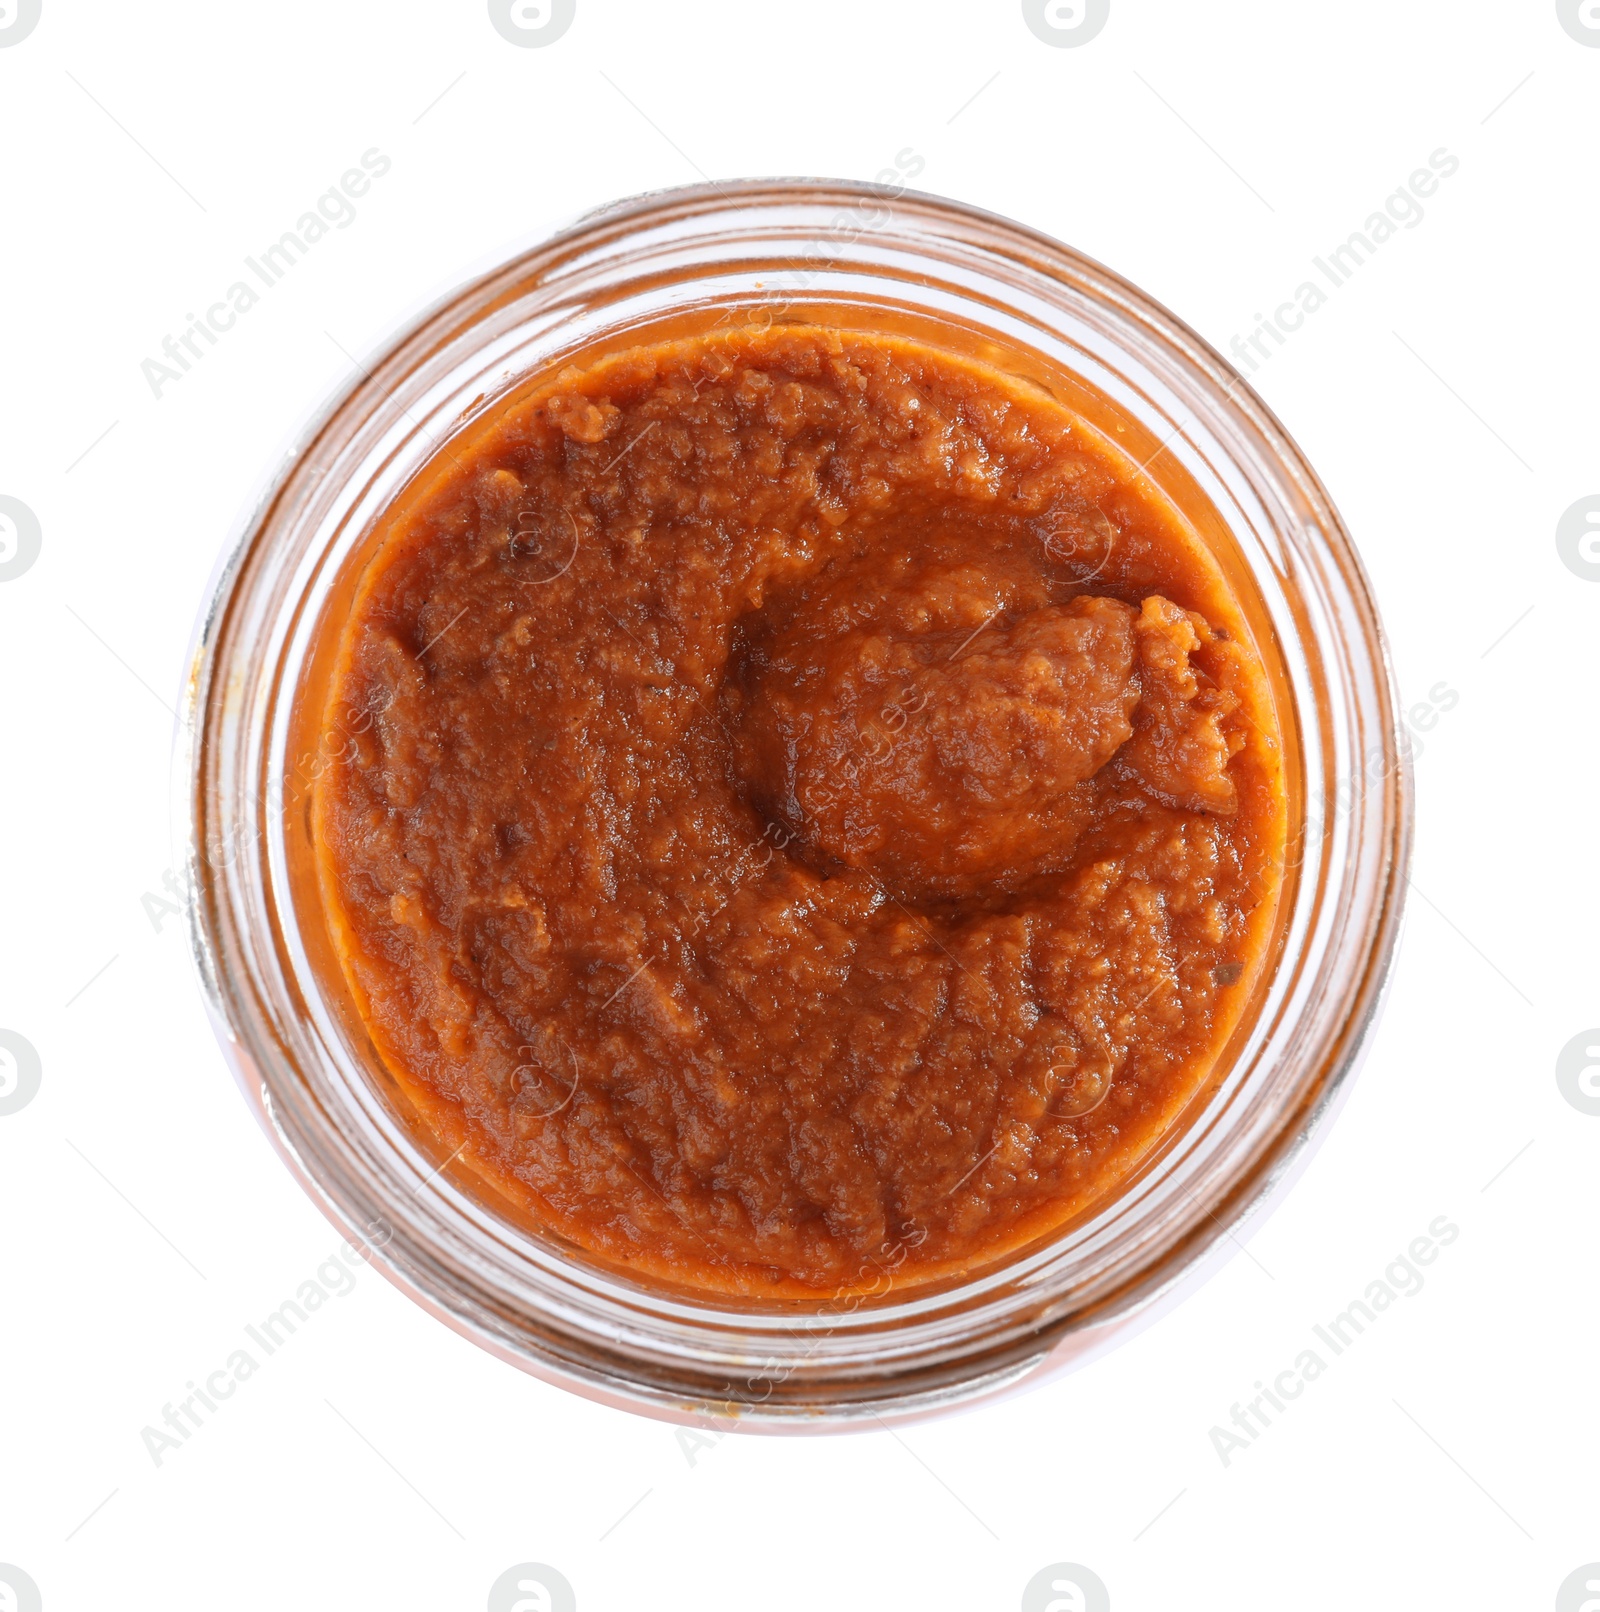 Photo of Open jar with butternut squash spread on white background, top view. Pickled food